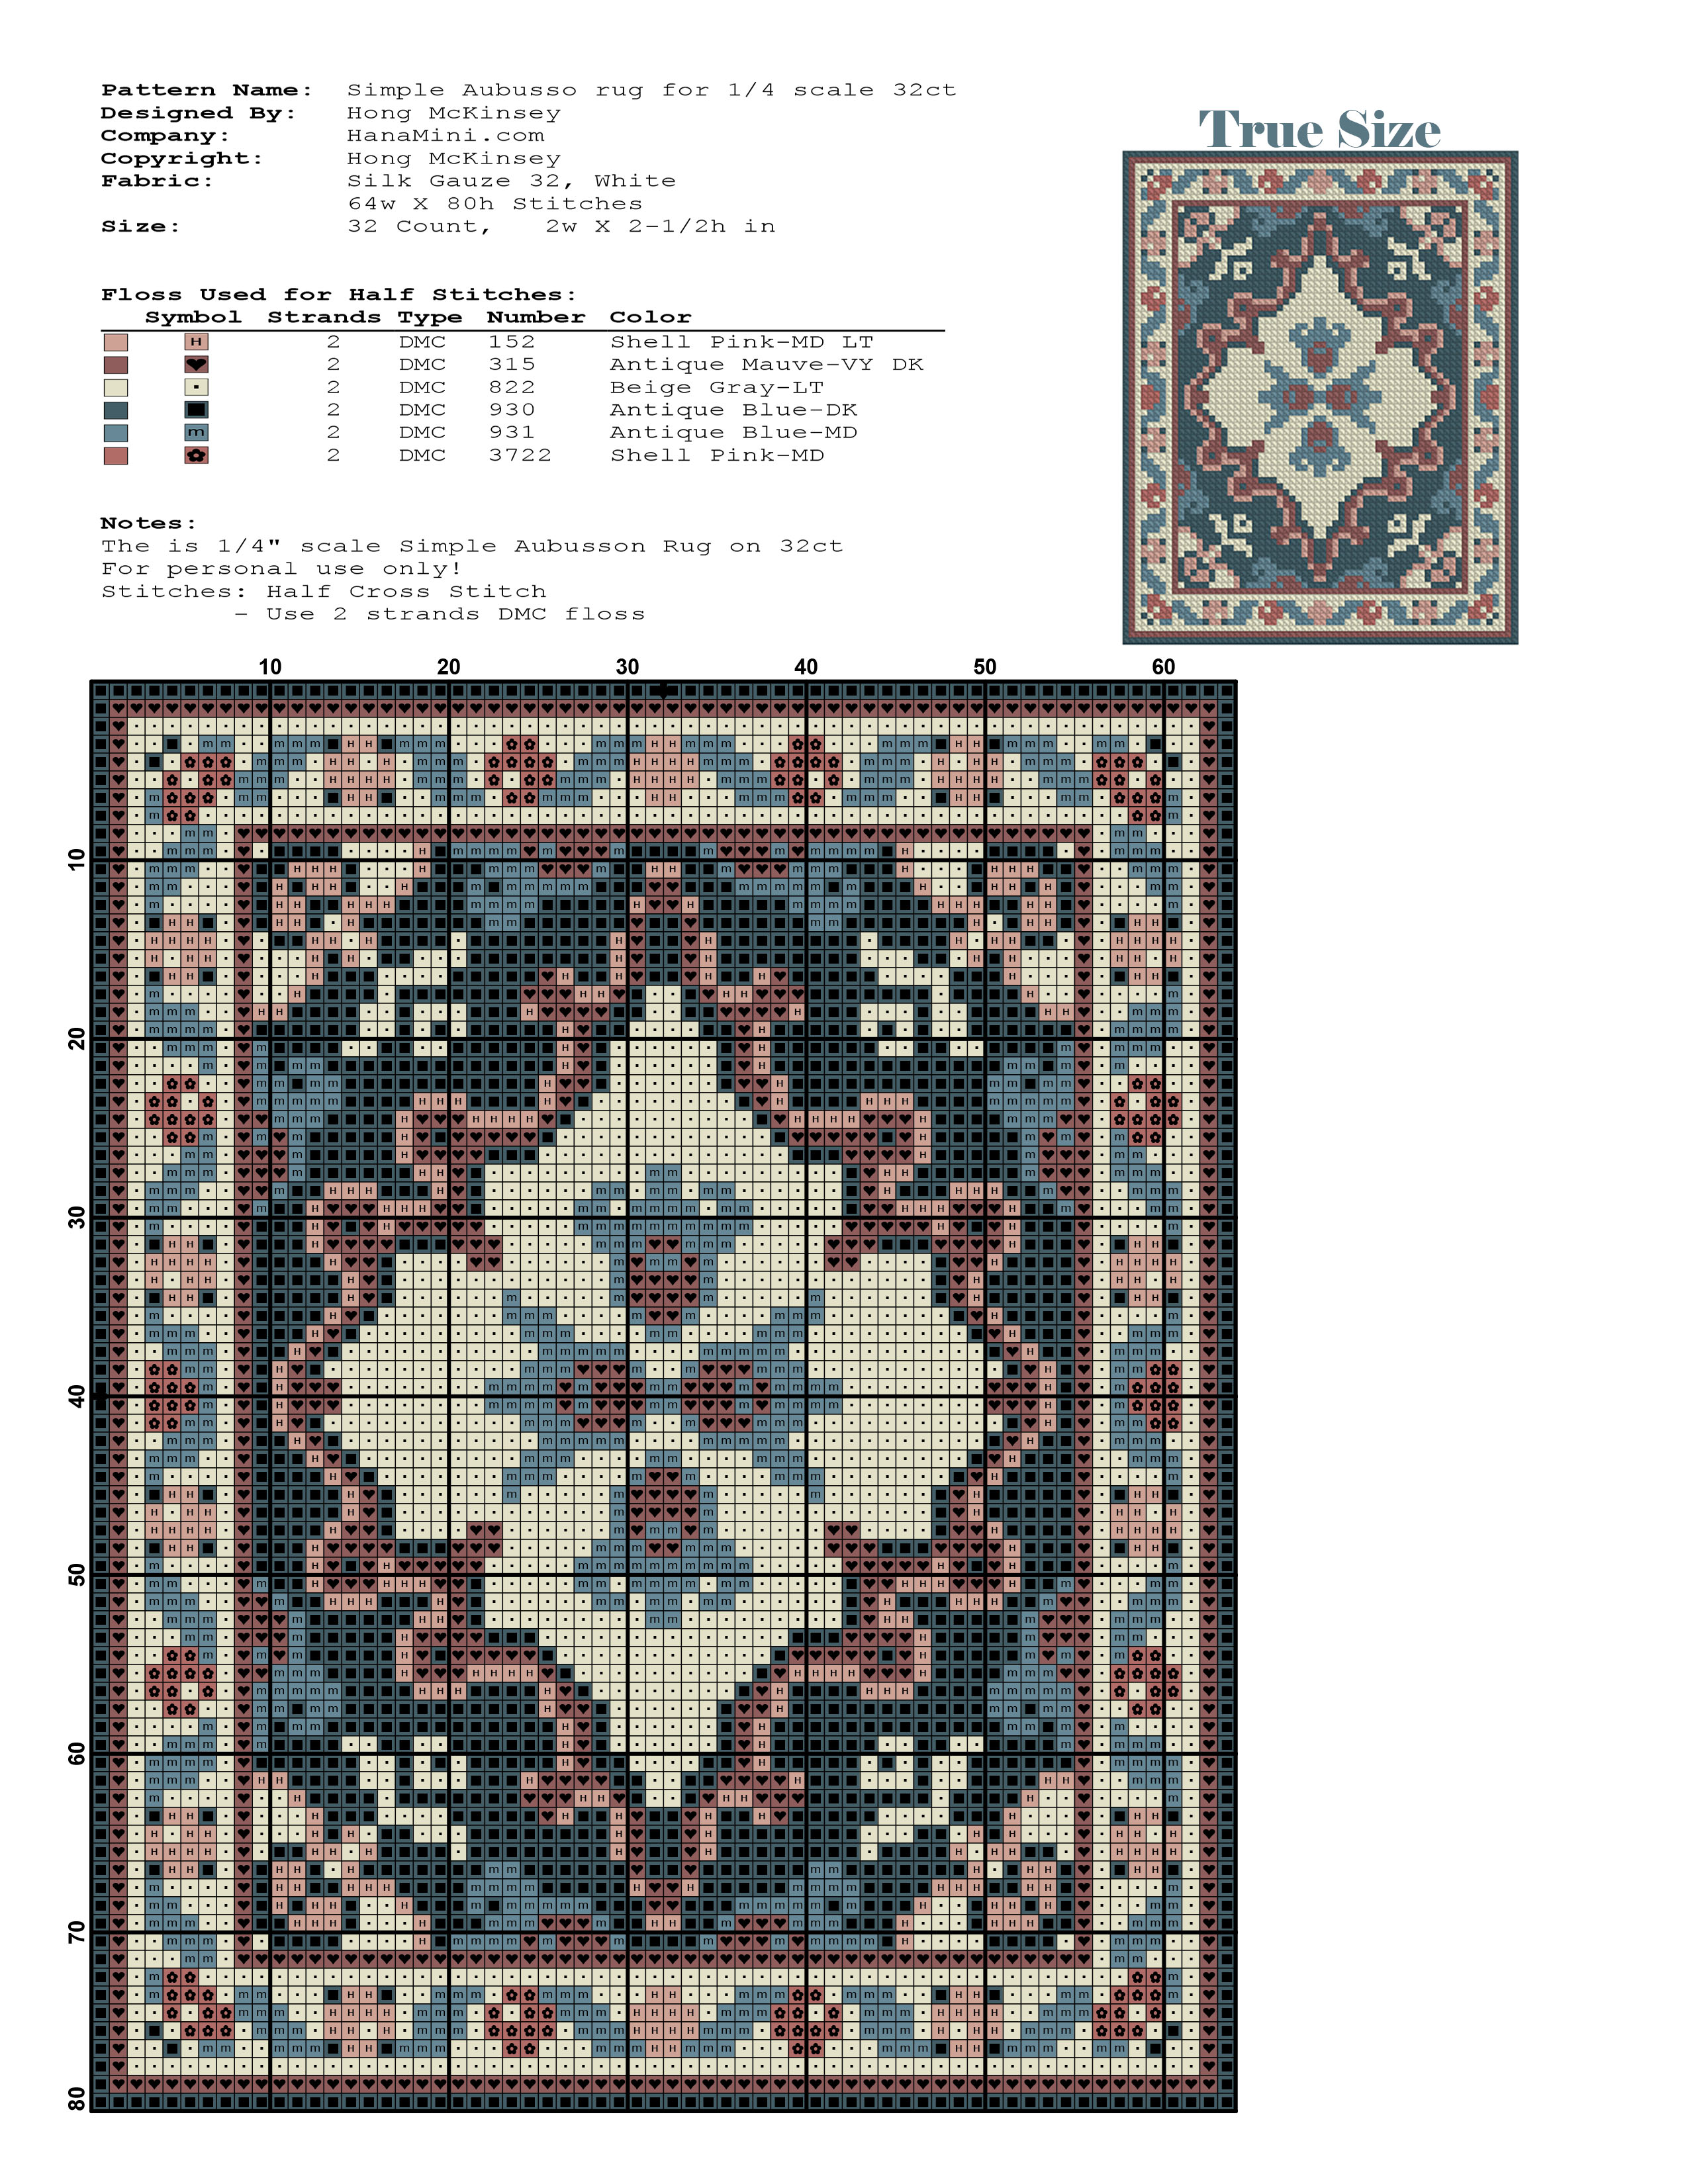 1/4" Scale Simple French style Aubusson Rug Pattern - Blue